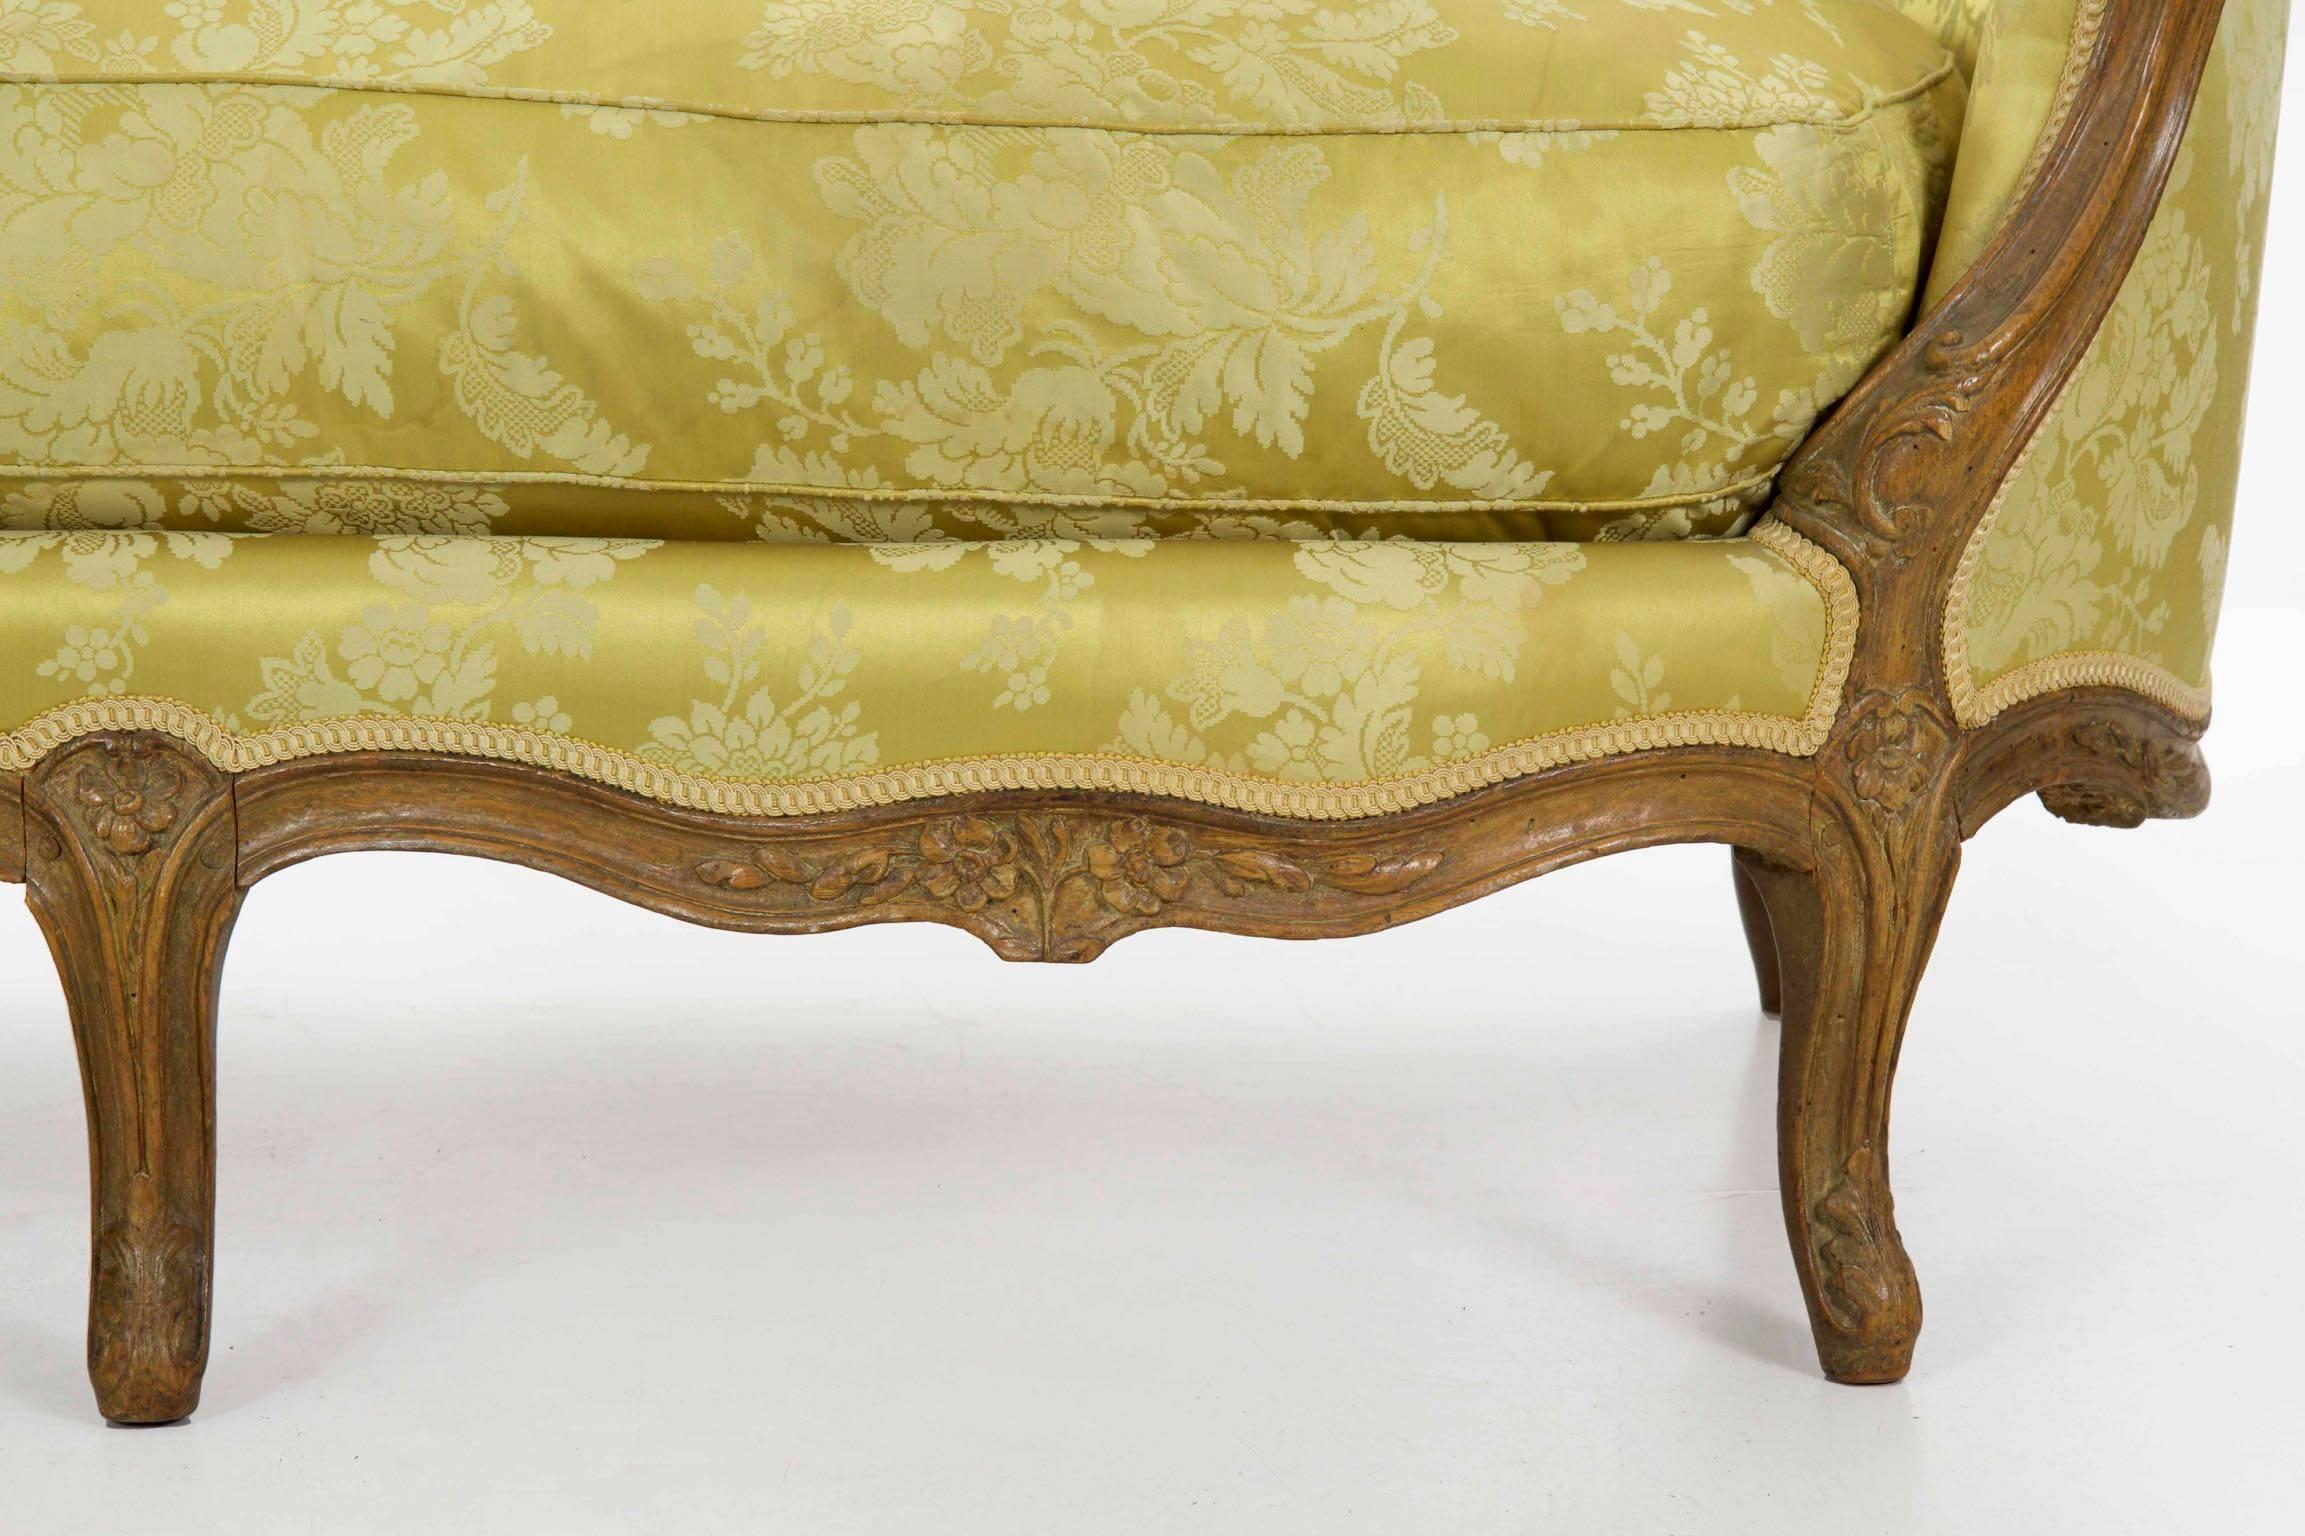 Louis XV Period Carved Beechwood Antique Canapé, 18th Century 3